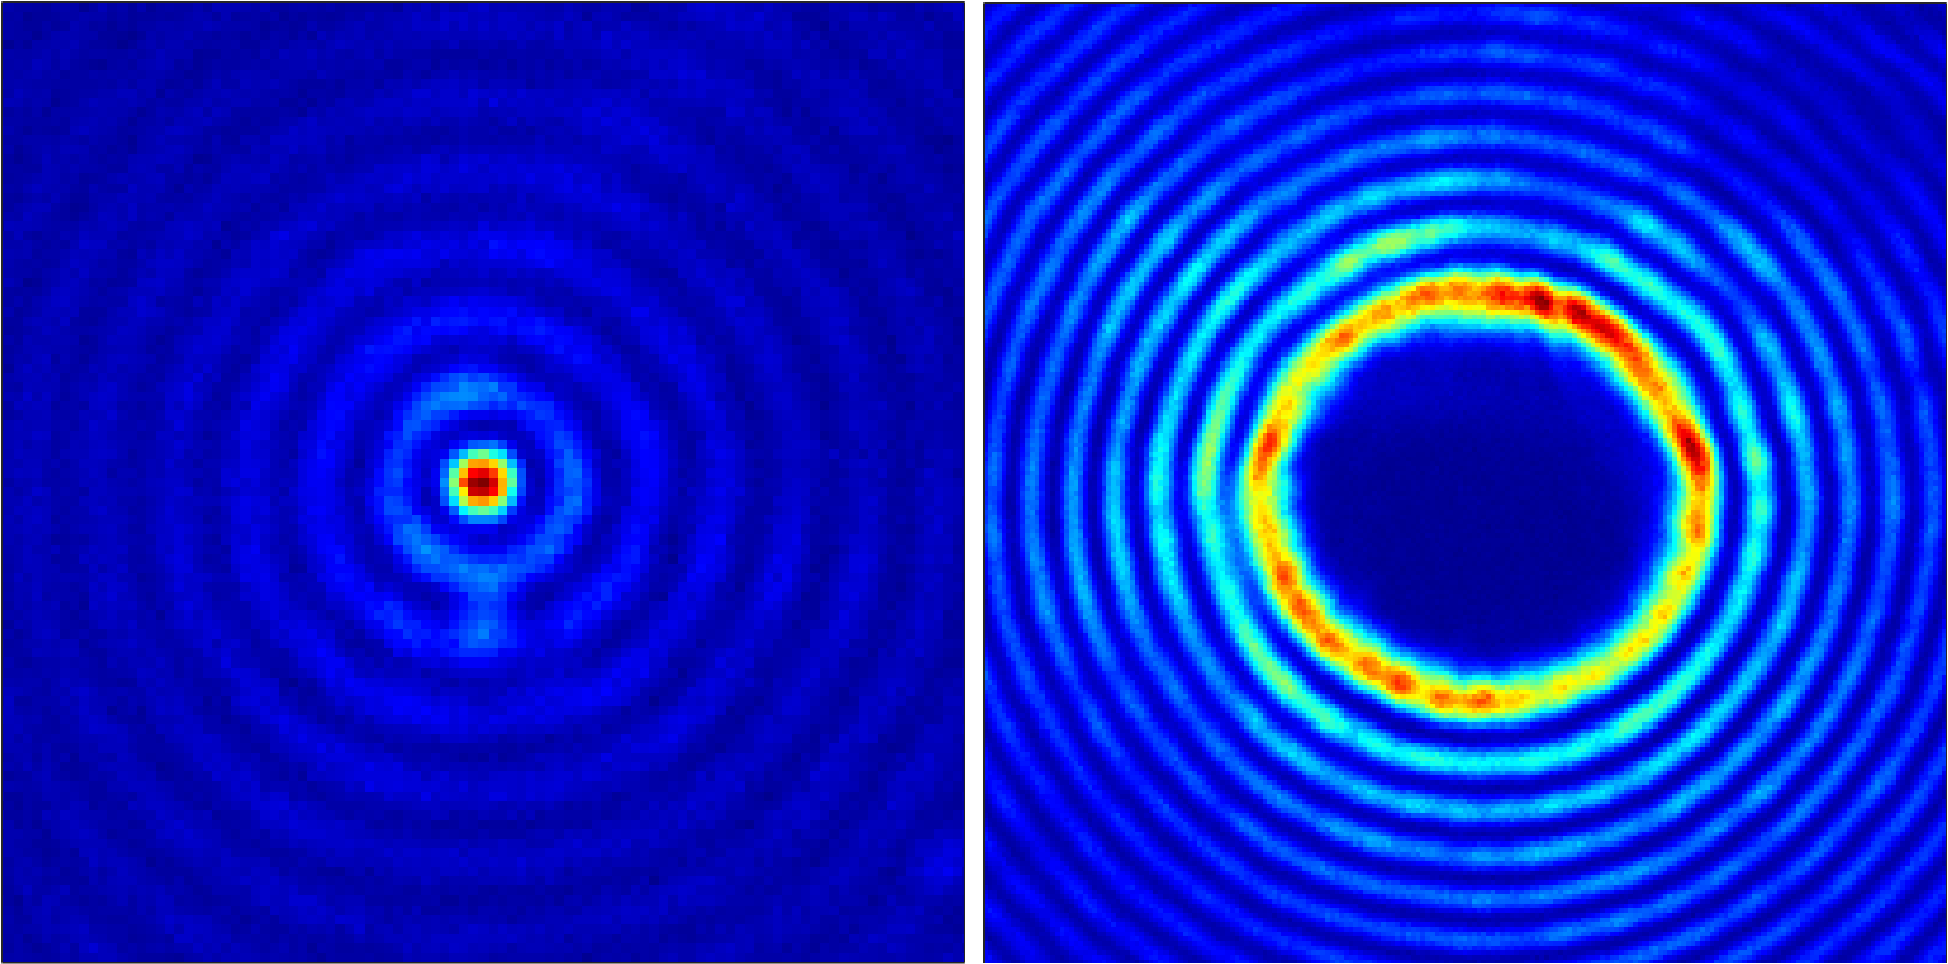 Caption: On the left is a cross section of the intensity of the Bessel beam responsible for creating the low-density plasma core. On the right is a cross section of the intensity of the Bessel beam that creates the high-density plasma wall. The left image is 50 micrometers across and the right image is 100 micrometers across. (Credit: Intense Laser-Matter Interactions Lab, University of Maryland)